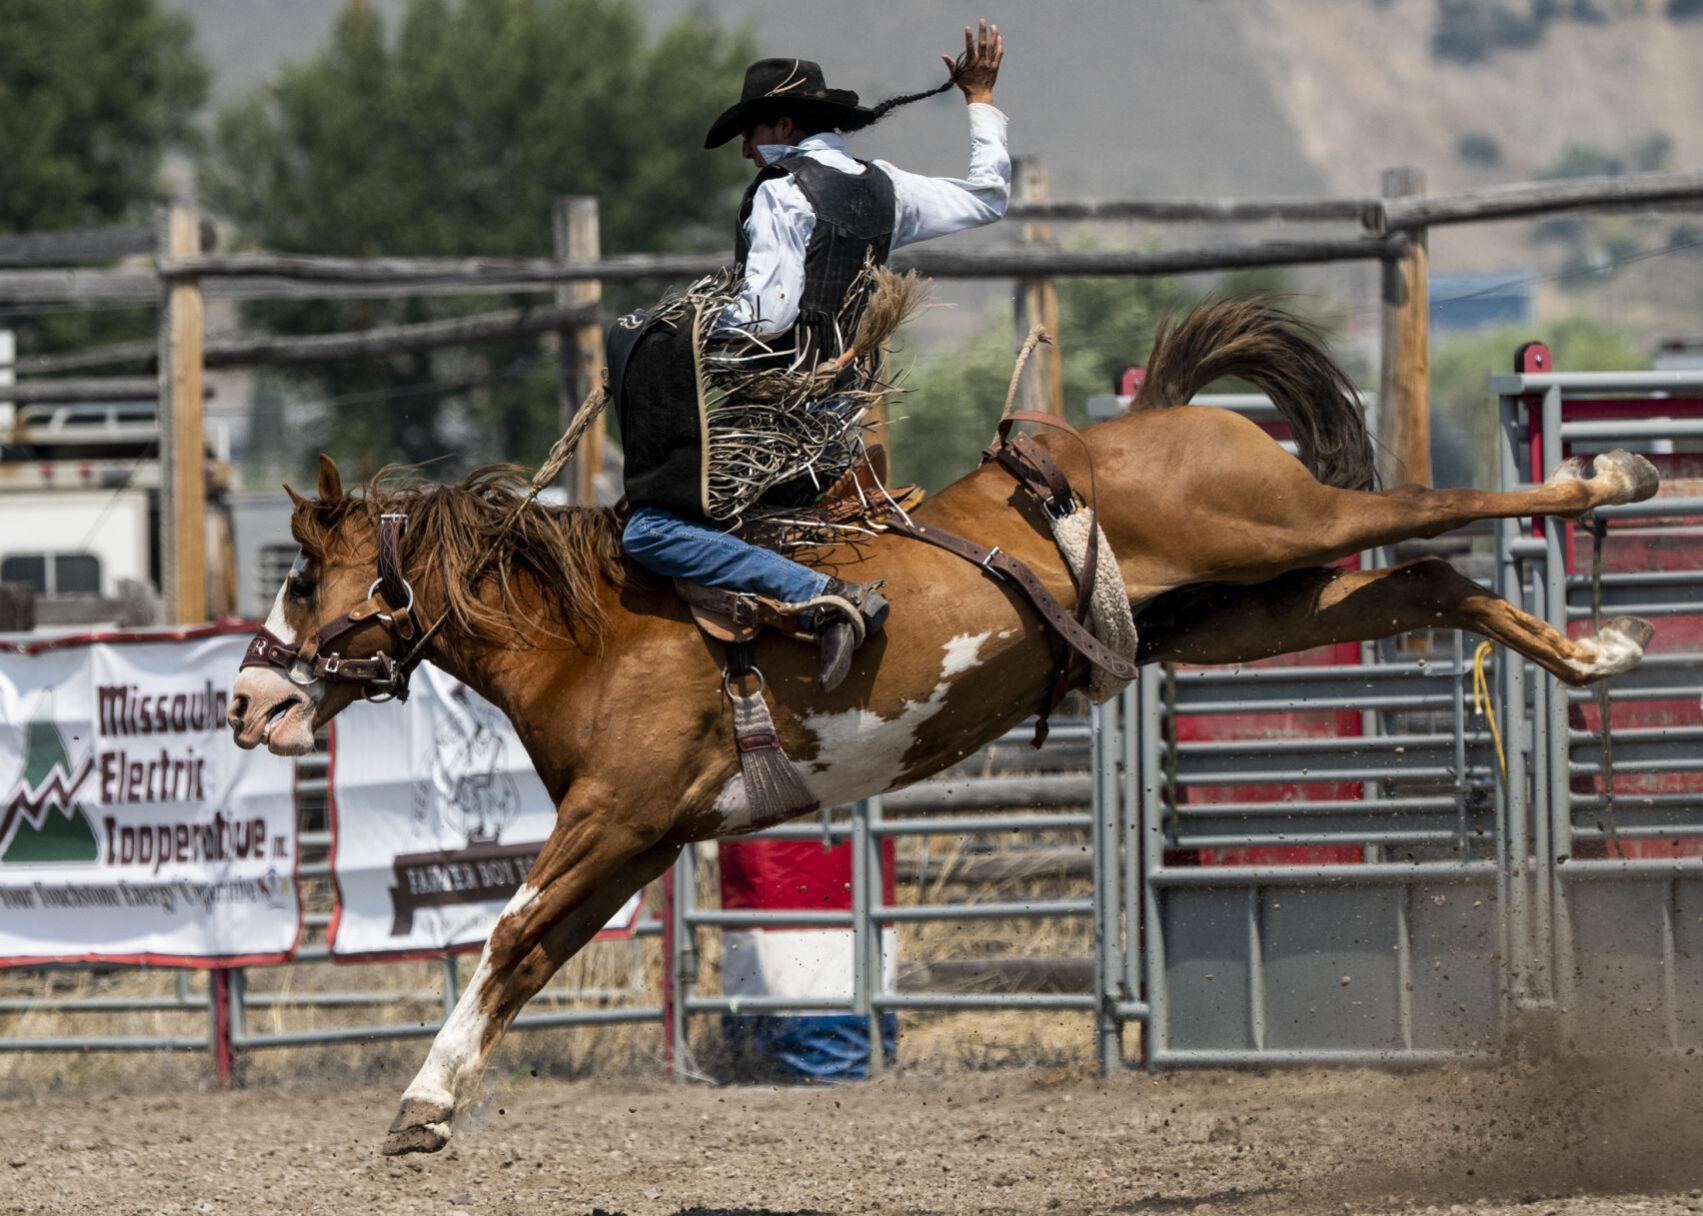 'Biggest day of the year' arrives in Drummond with 81st annual rodeo